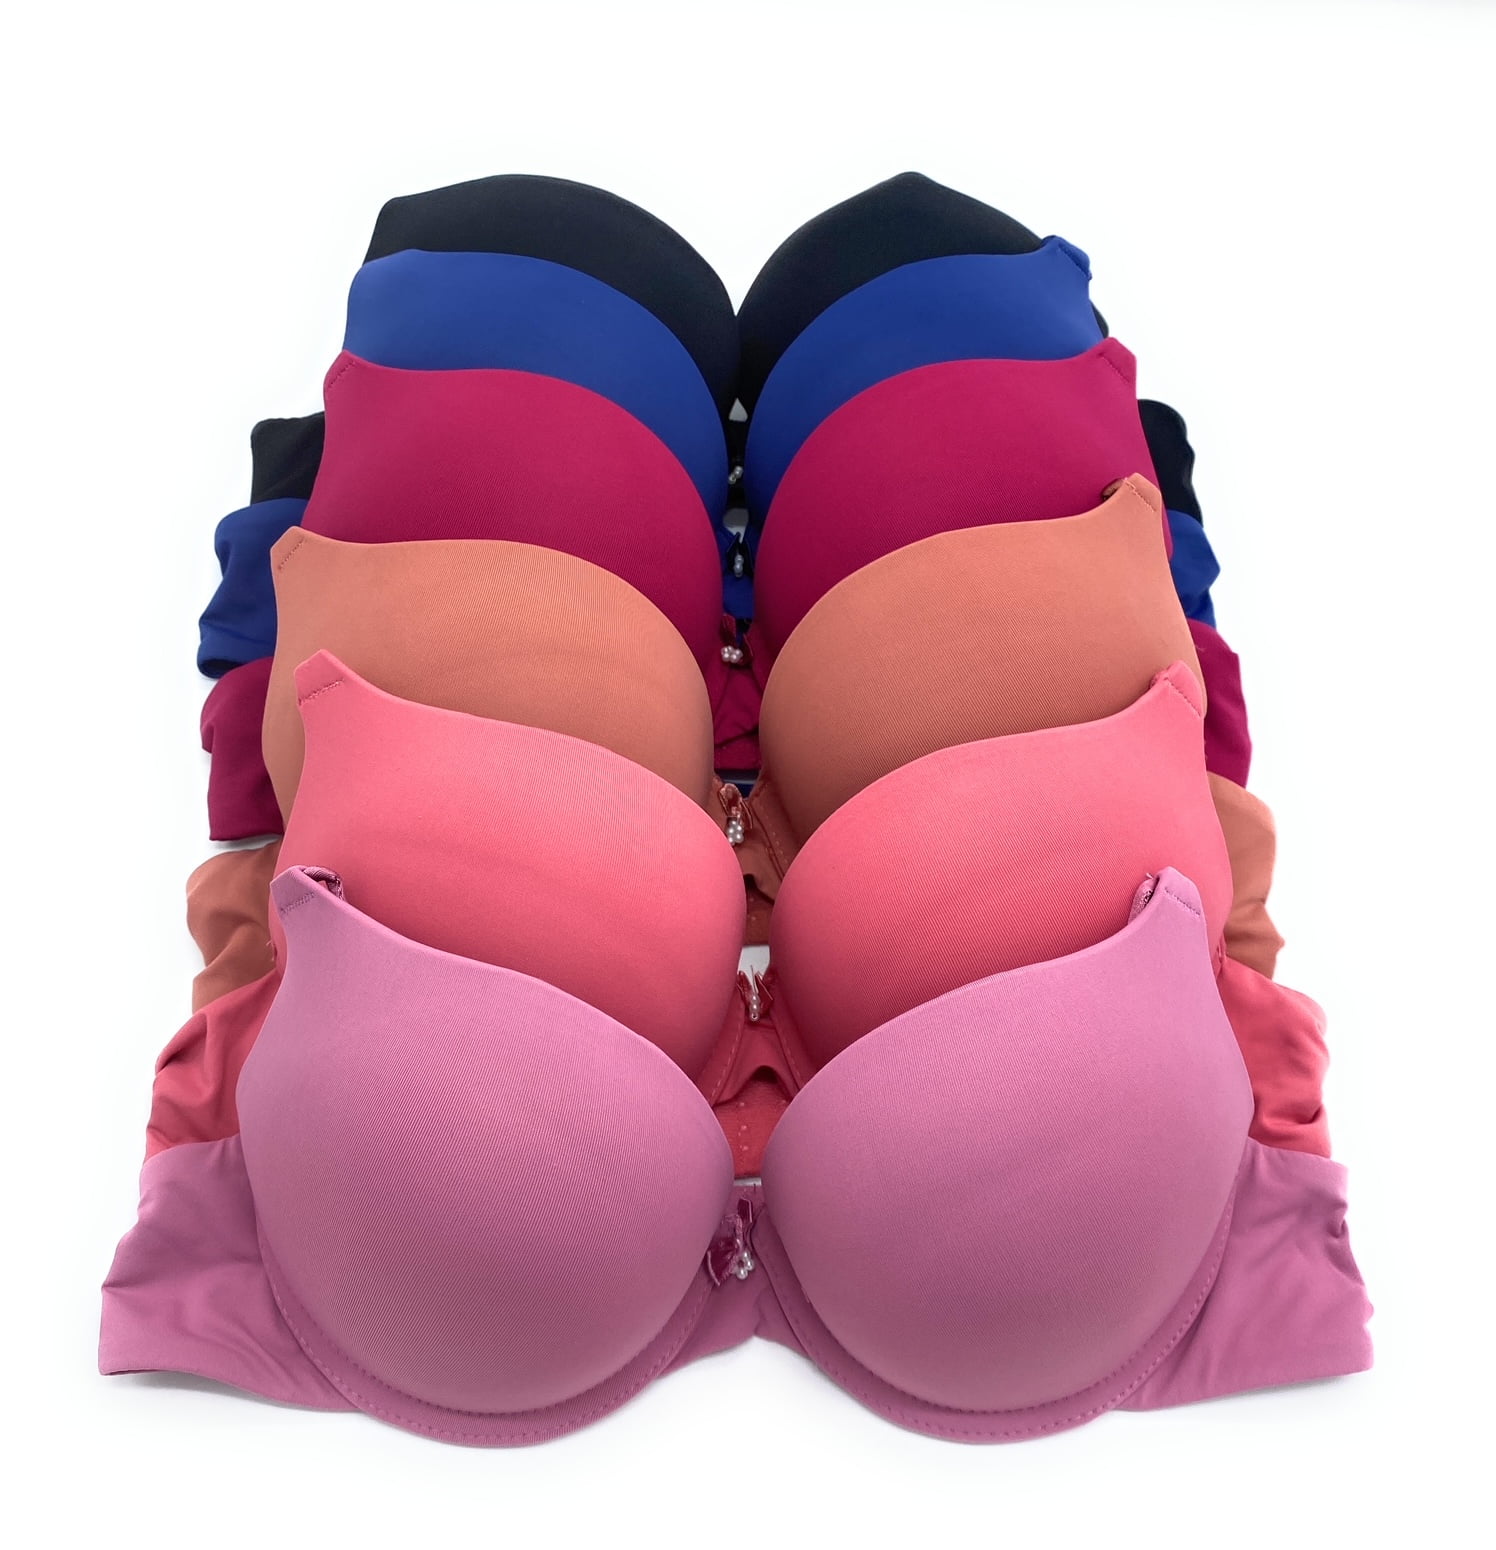 EXTREME DOUBLE PUSH UP Add 2 Cup Sizes Push Up Bra Padded FREE RETURN 1,3  or 6pc 